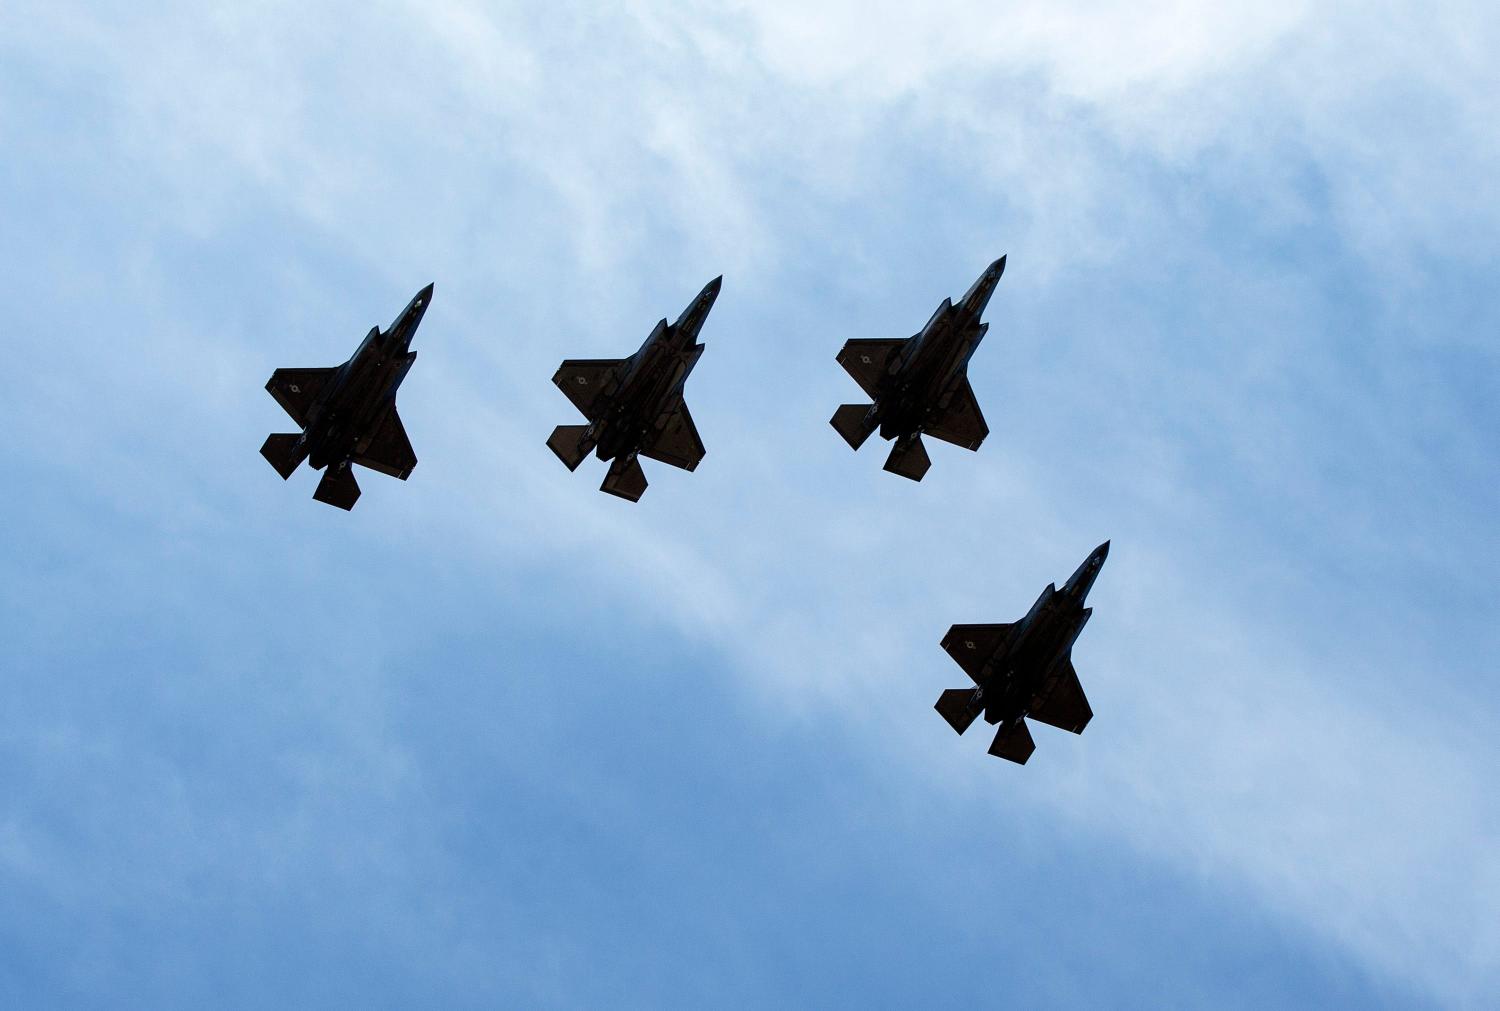 A flyover from Luke Air Force Base during the funeral service for Peoria police Officer Jason Judd at Christ's Church of the Valley in Peoria on July 14, 2020. Judd died July 1 in a motorcycle crash.Funeral Service For Peoria Police Officer Jason Judd